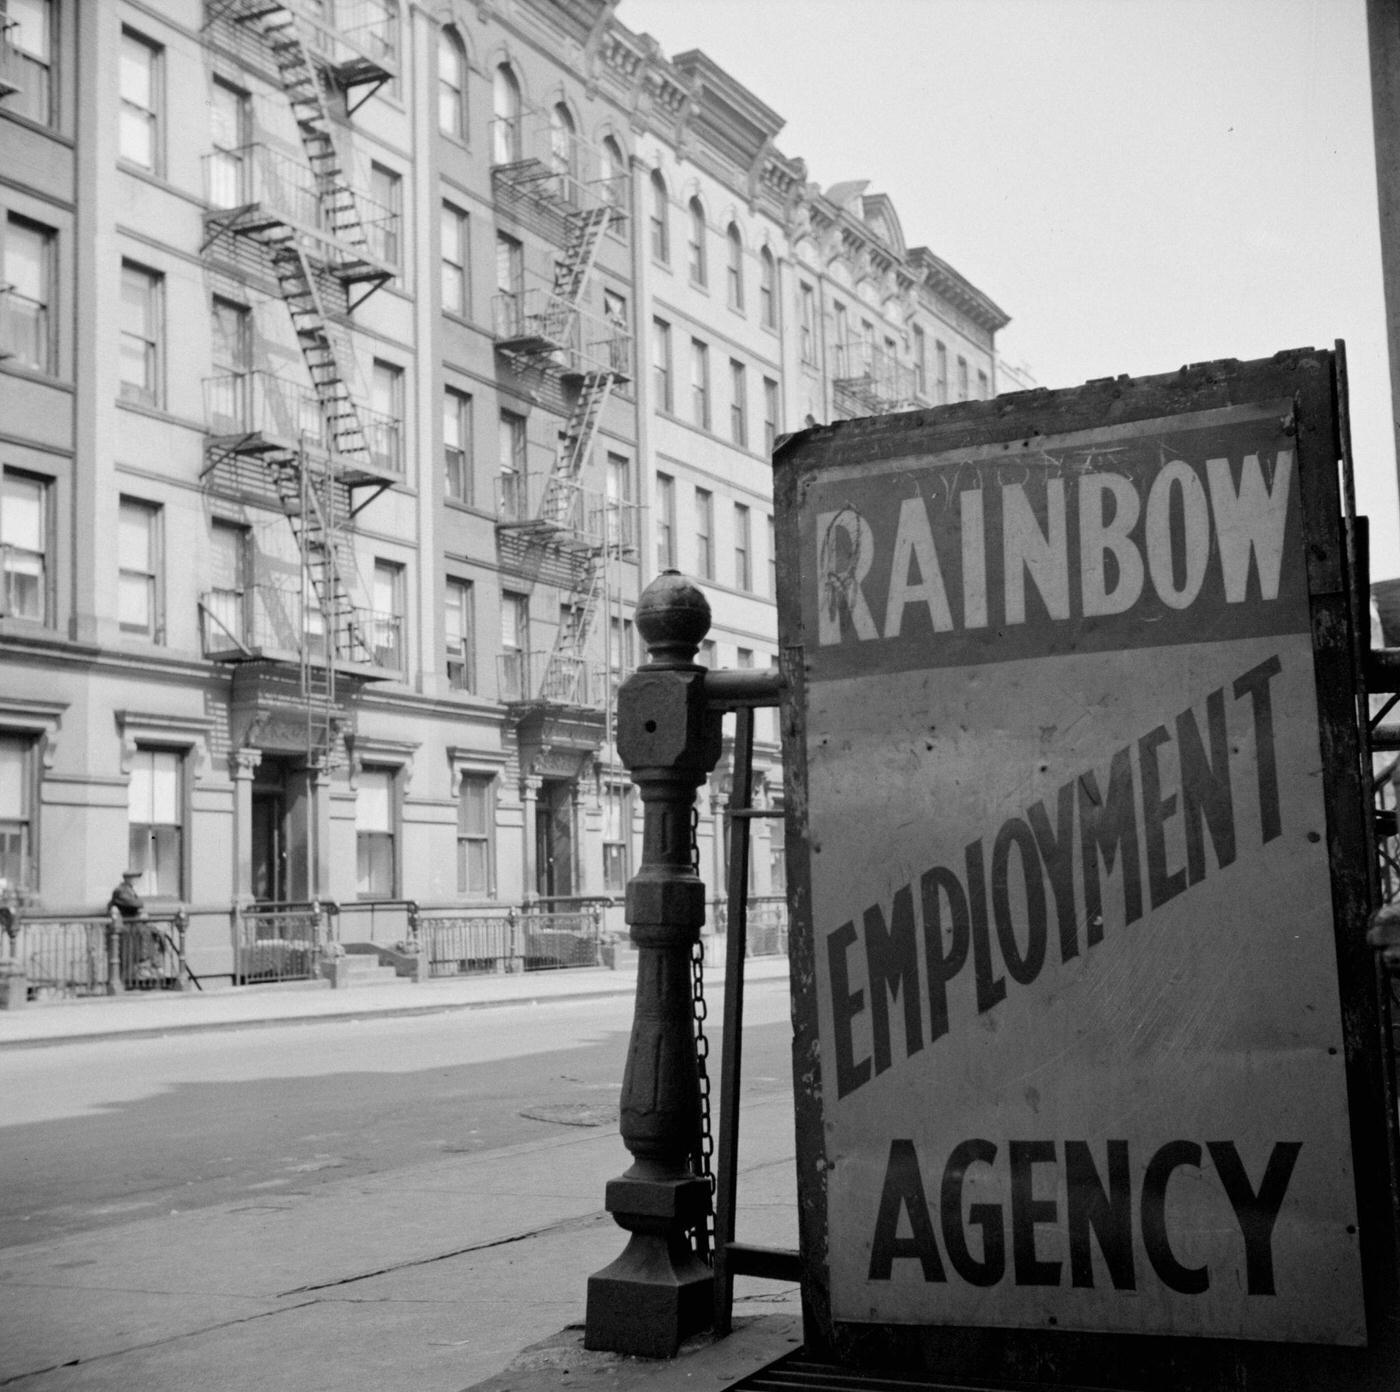 One Of The Numerous Employment Agency Signs In The Harlem Area, Manhattan, 1948